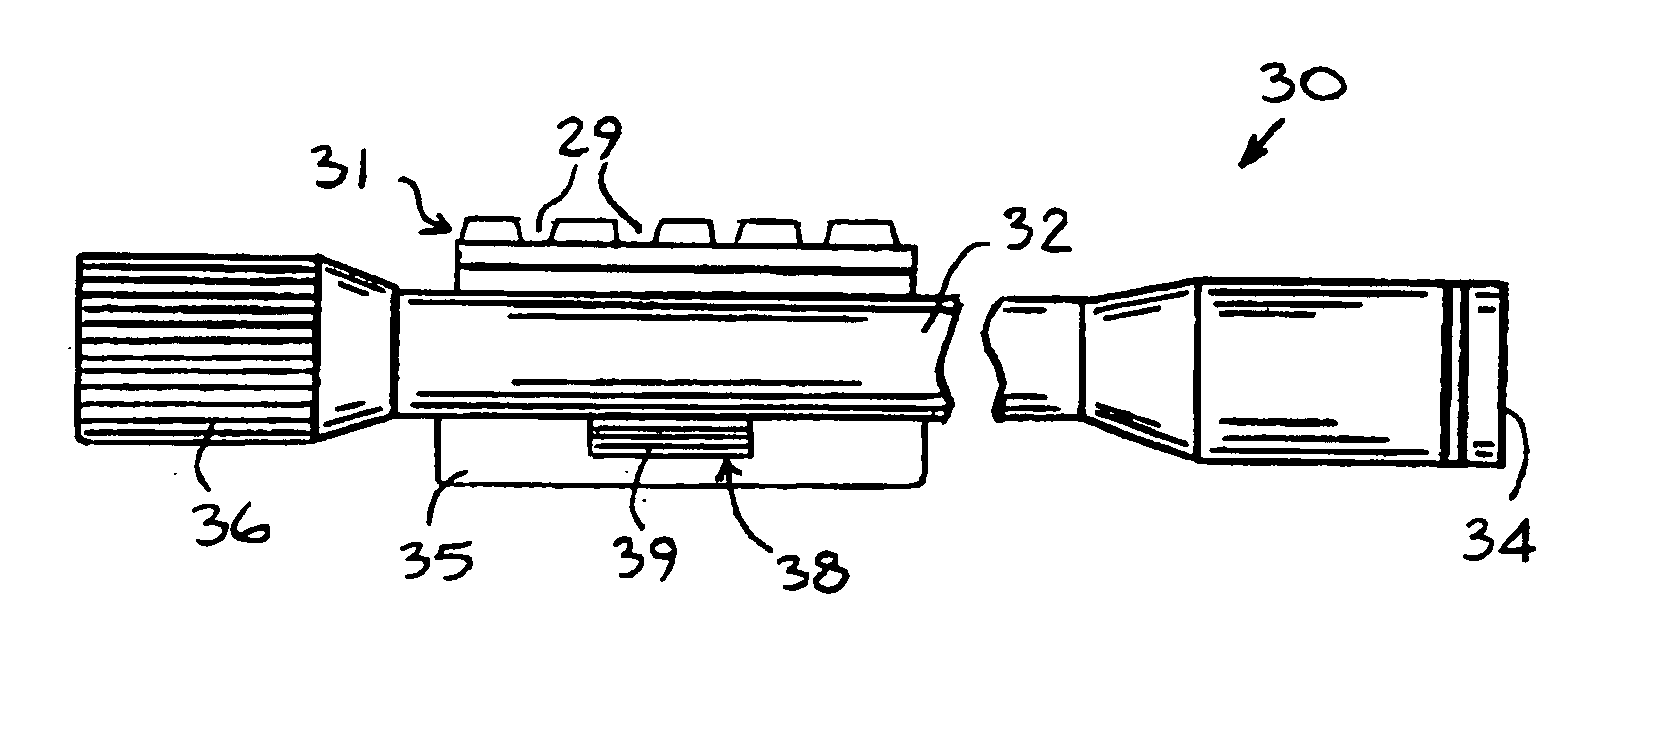 Optical accessory with mounting rail